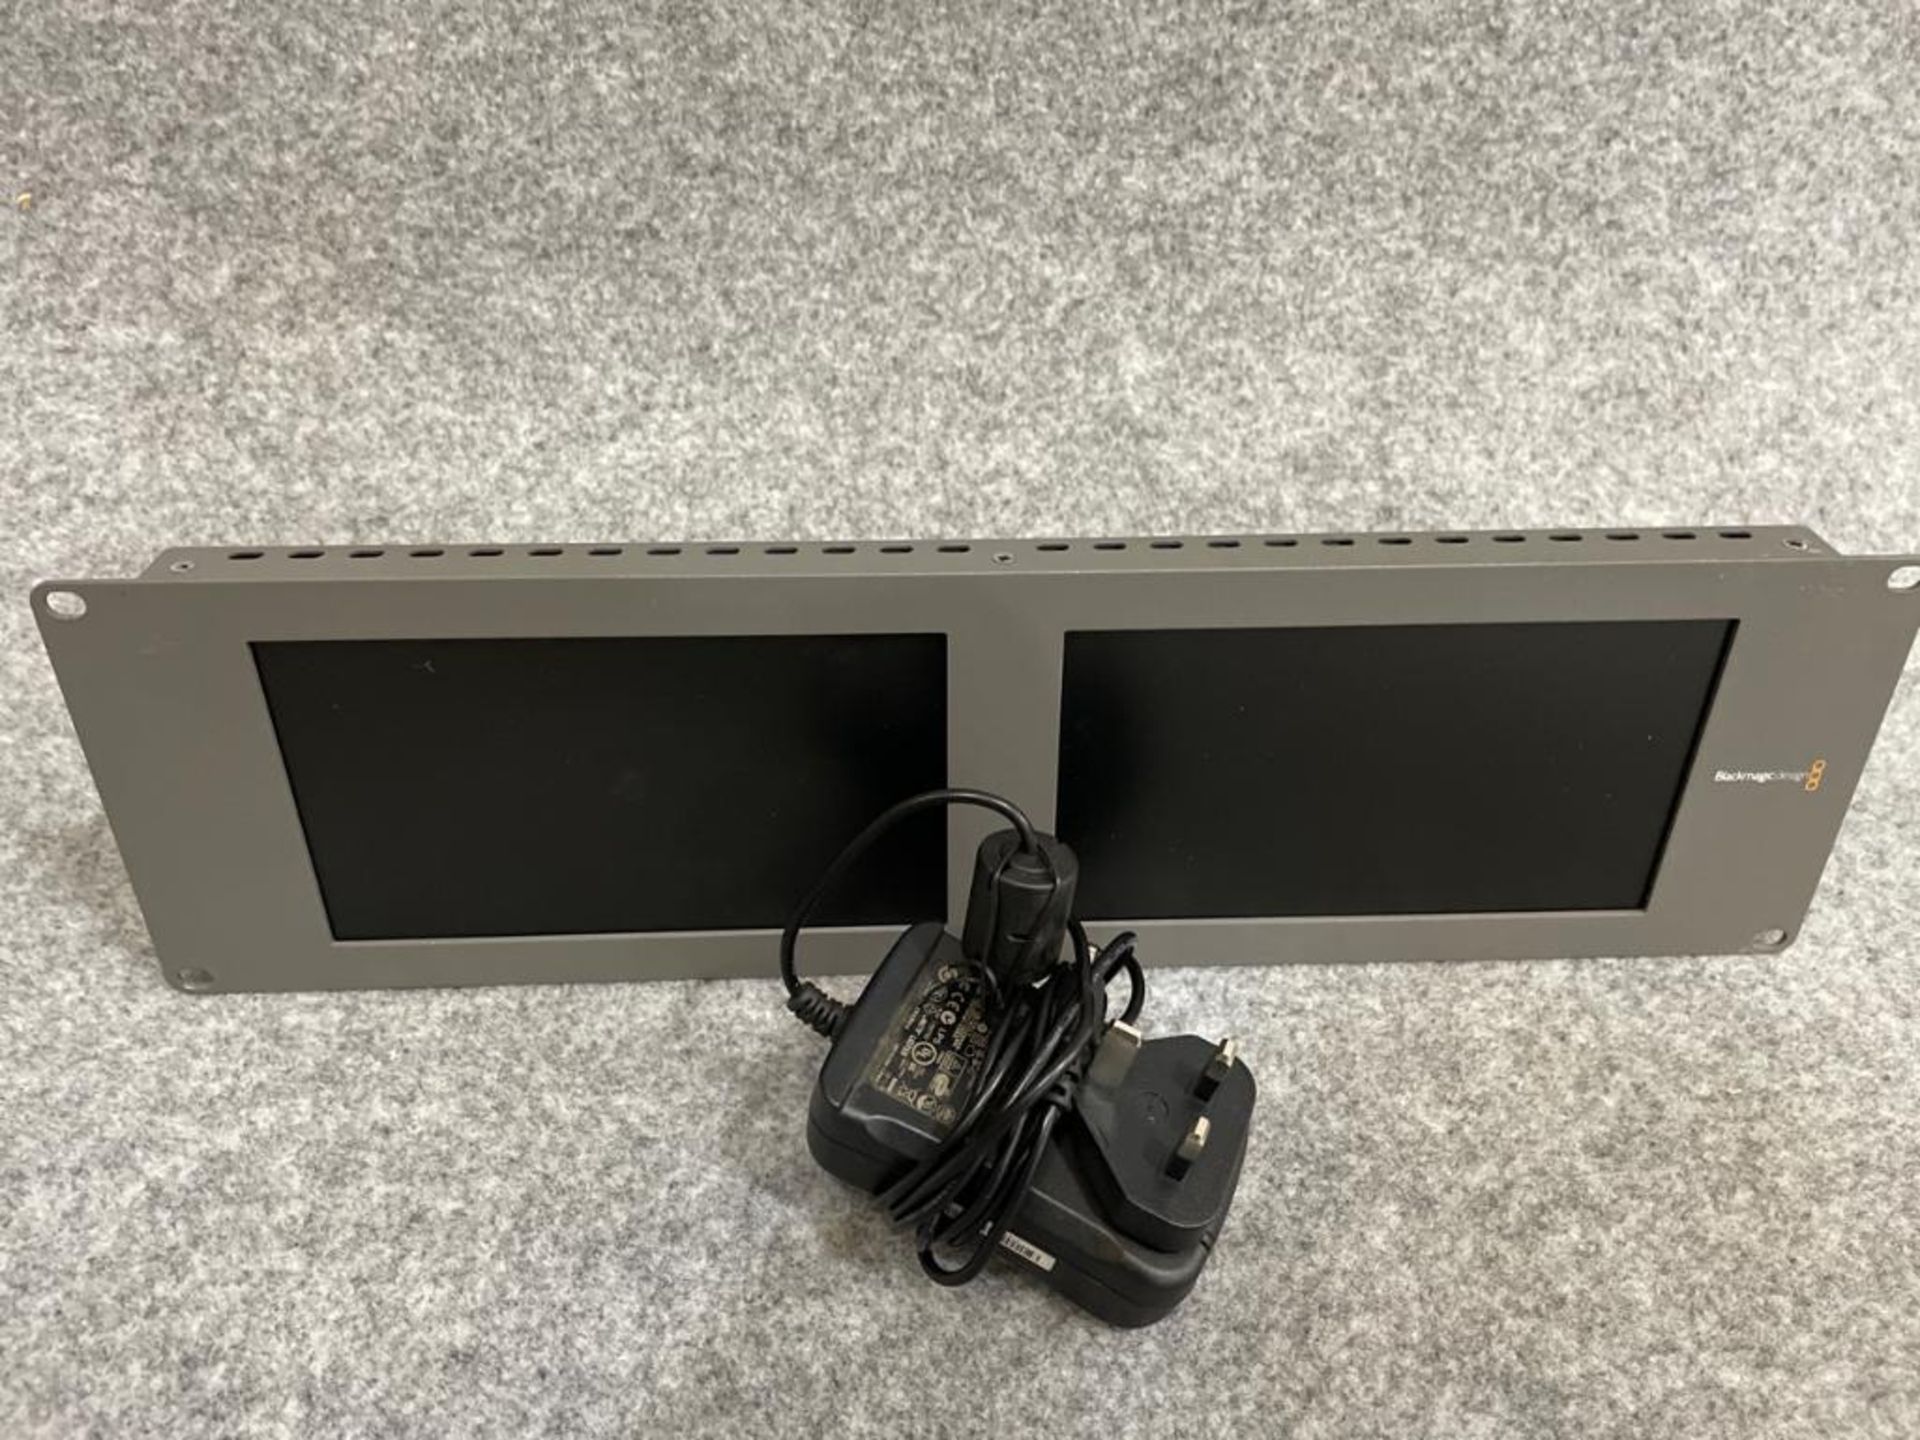 BlackMagic Dual HD Monitor with power supply SN:1349899 - Image 3 of 3